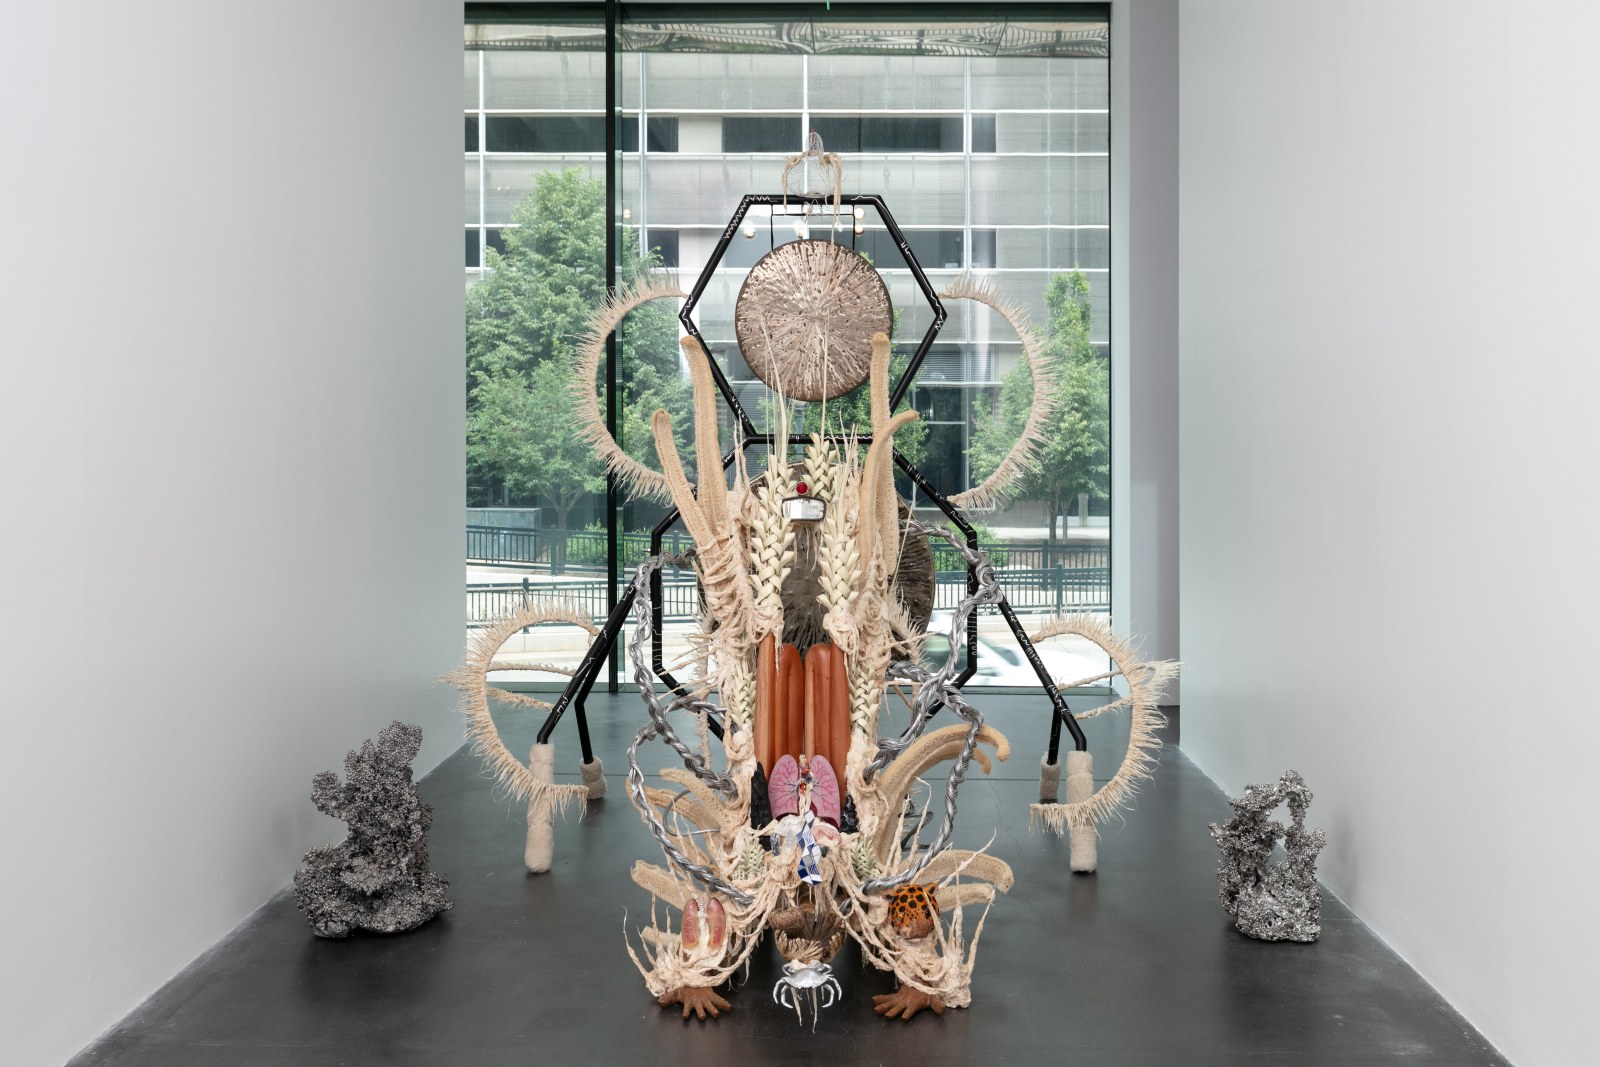 Guadalupe Maravilla: Purring Monsters with Mirrors on Their Backs - Museum of Contemporary Art, Denver - Exhibitions - PPOW